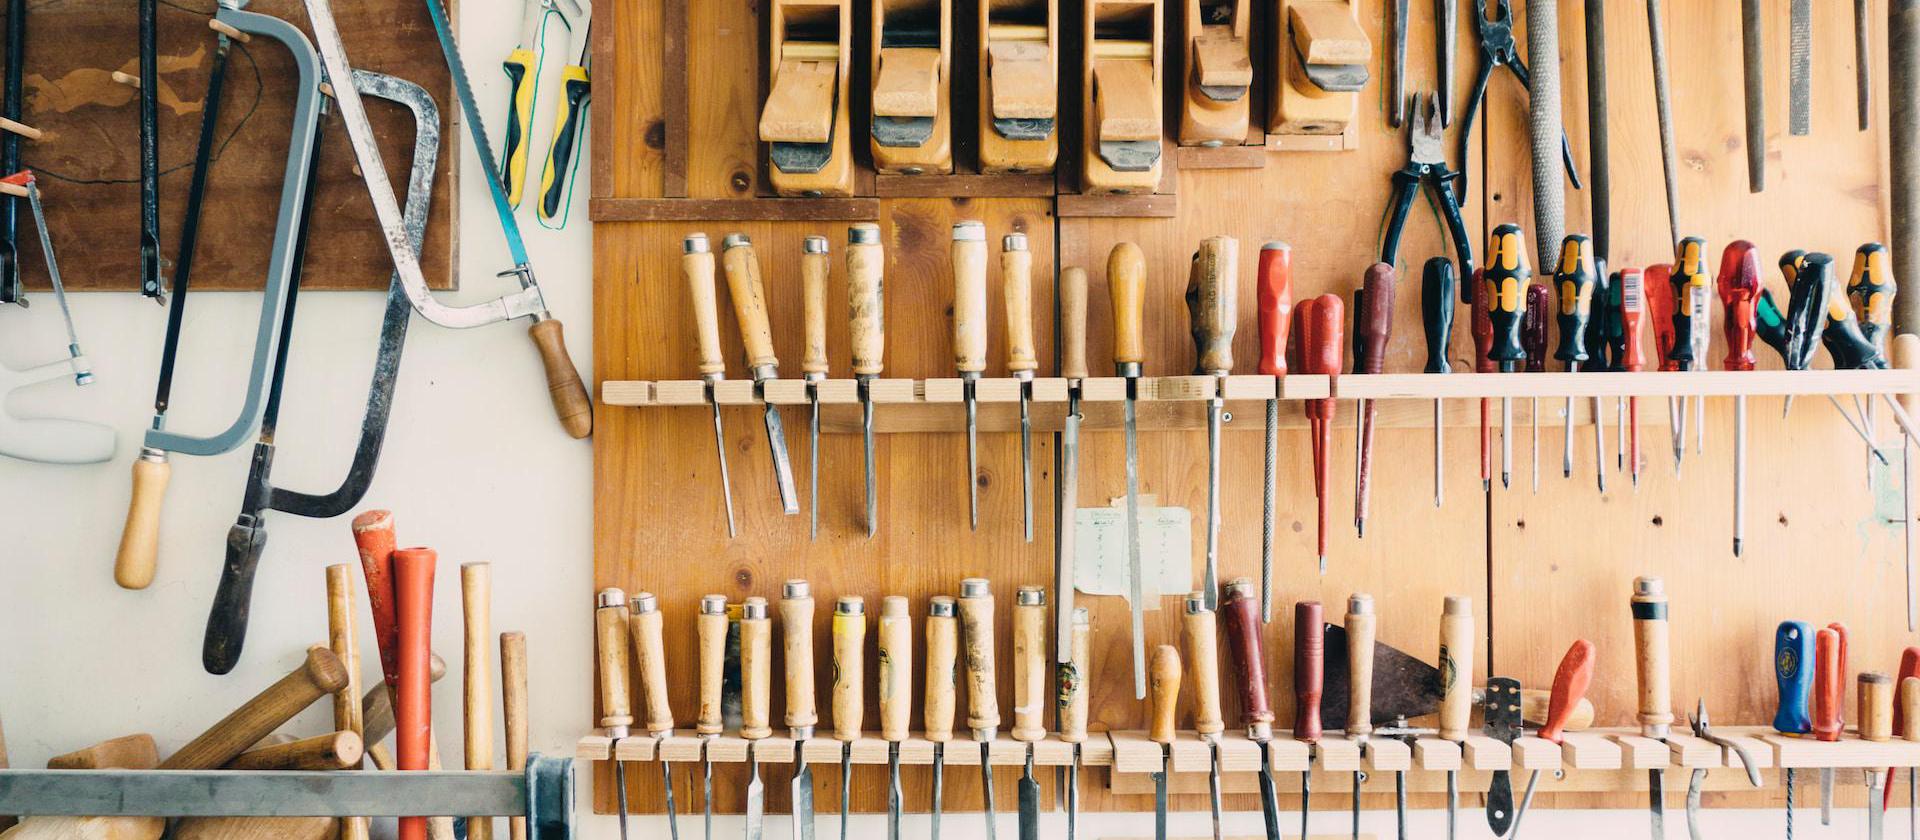 Image of tools hanging ready on the wall.